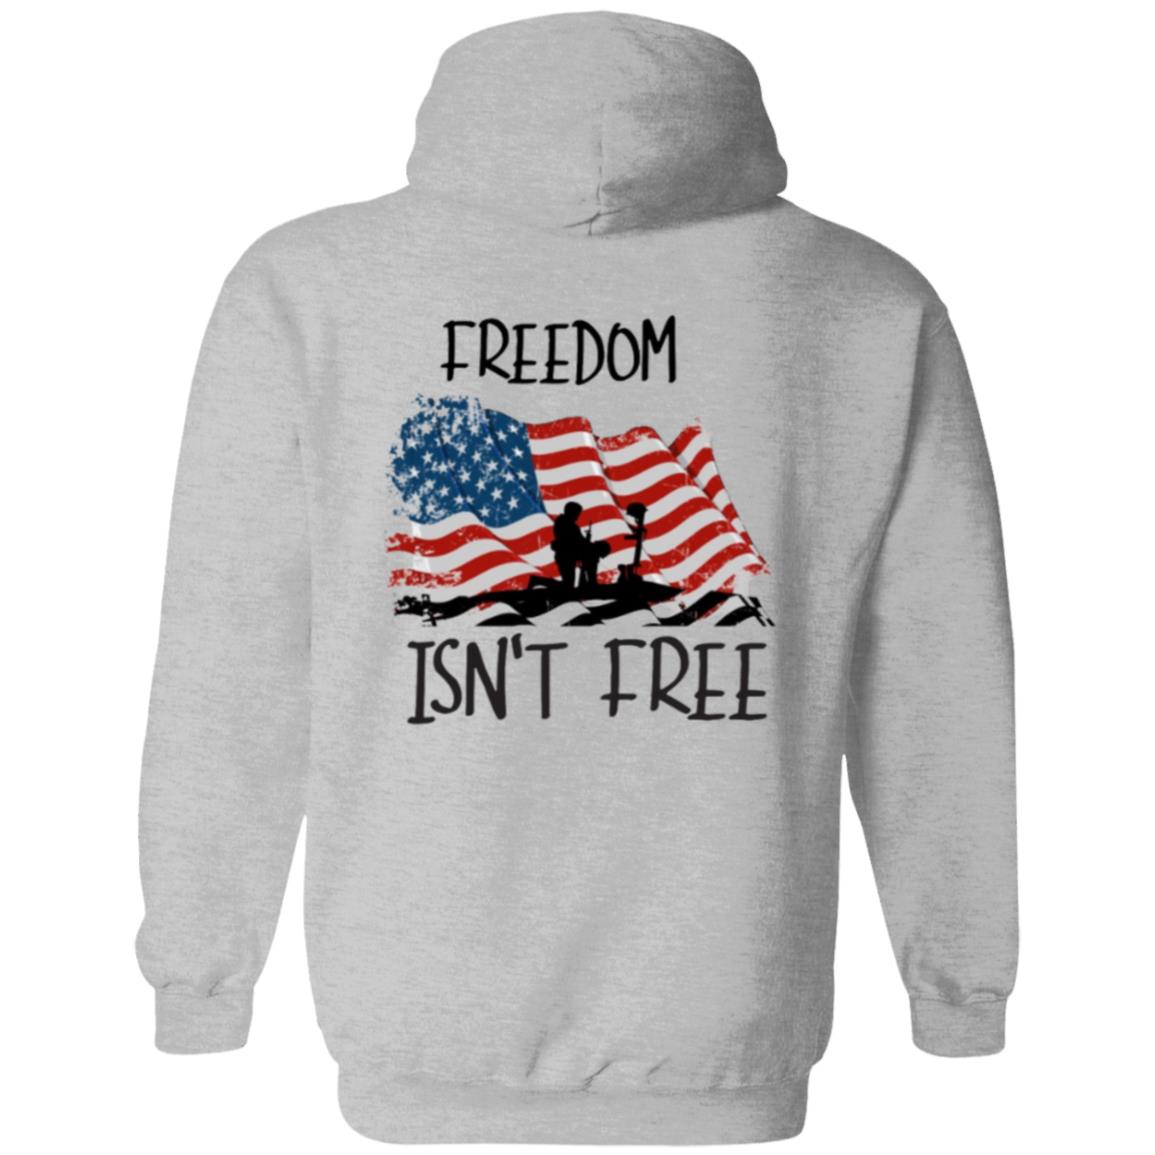 All 4 One Memorial Day Pullover Hoodie